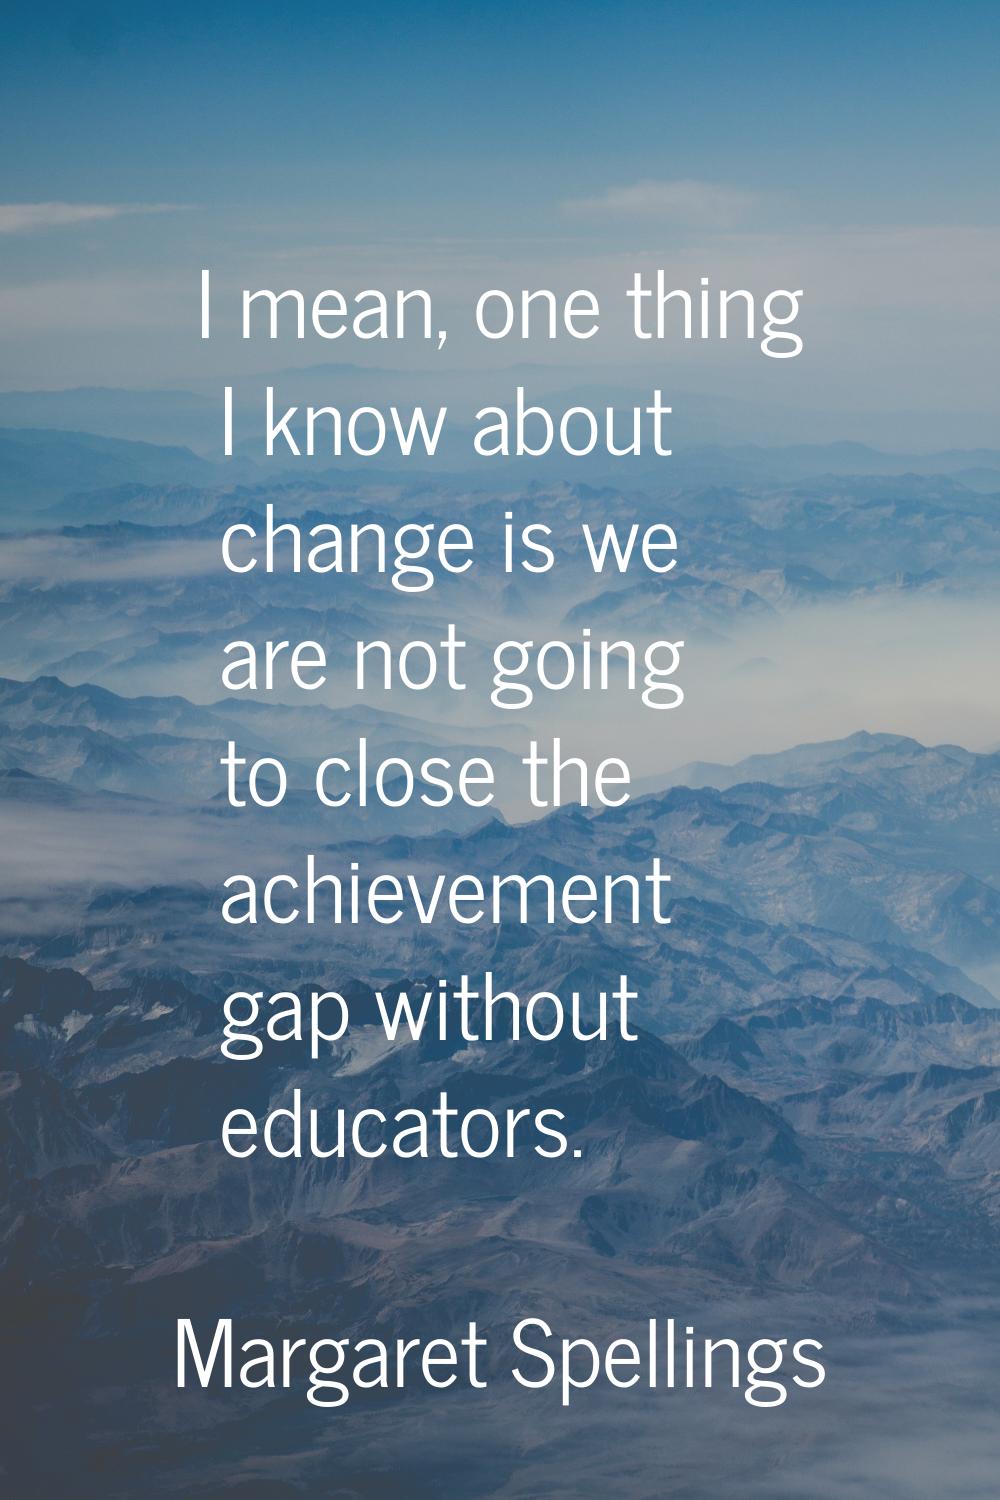 I mean, one thing I know about change is we are not going to close the achievement gap without educ